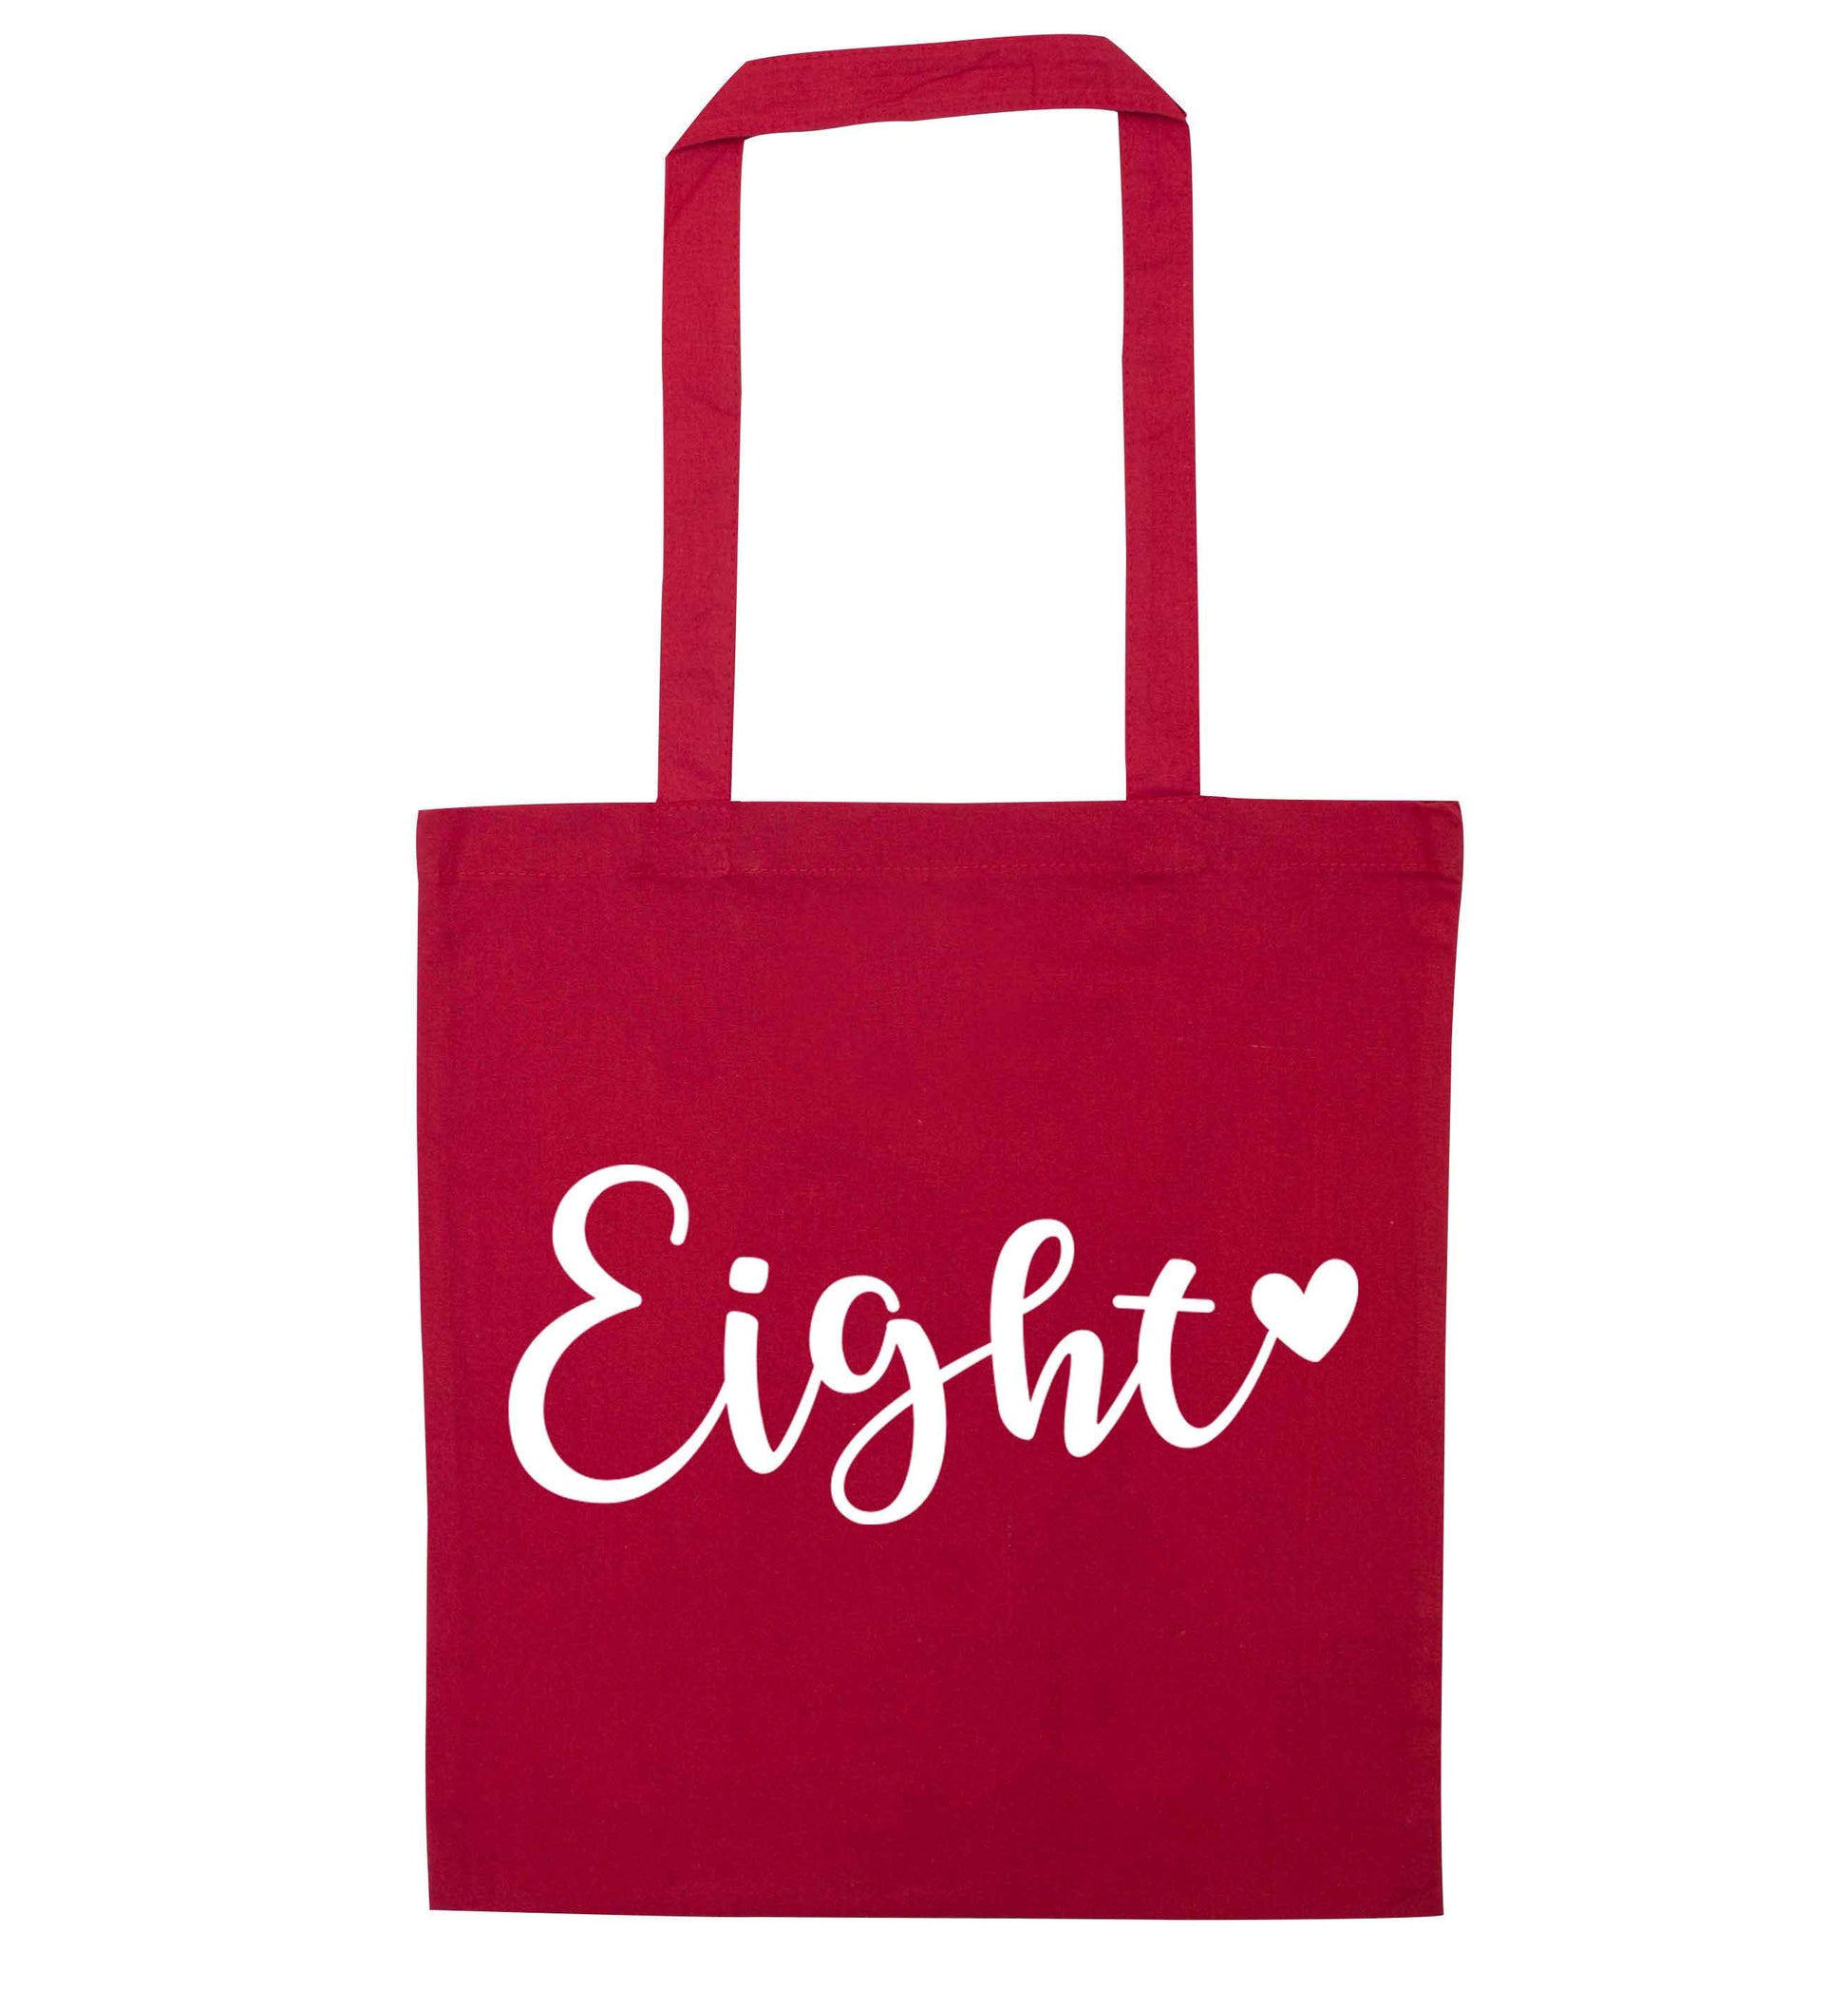 Eight and heart red tote bag